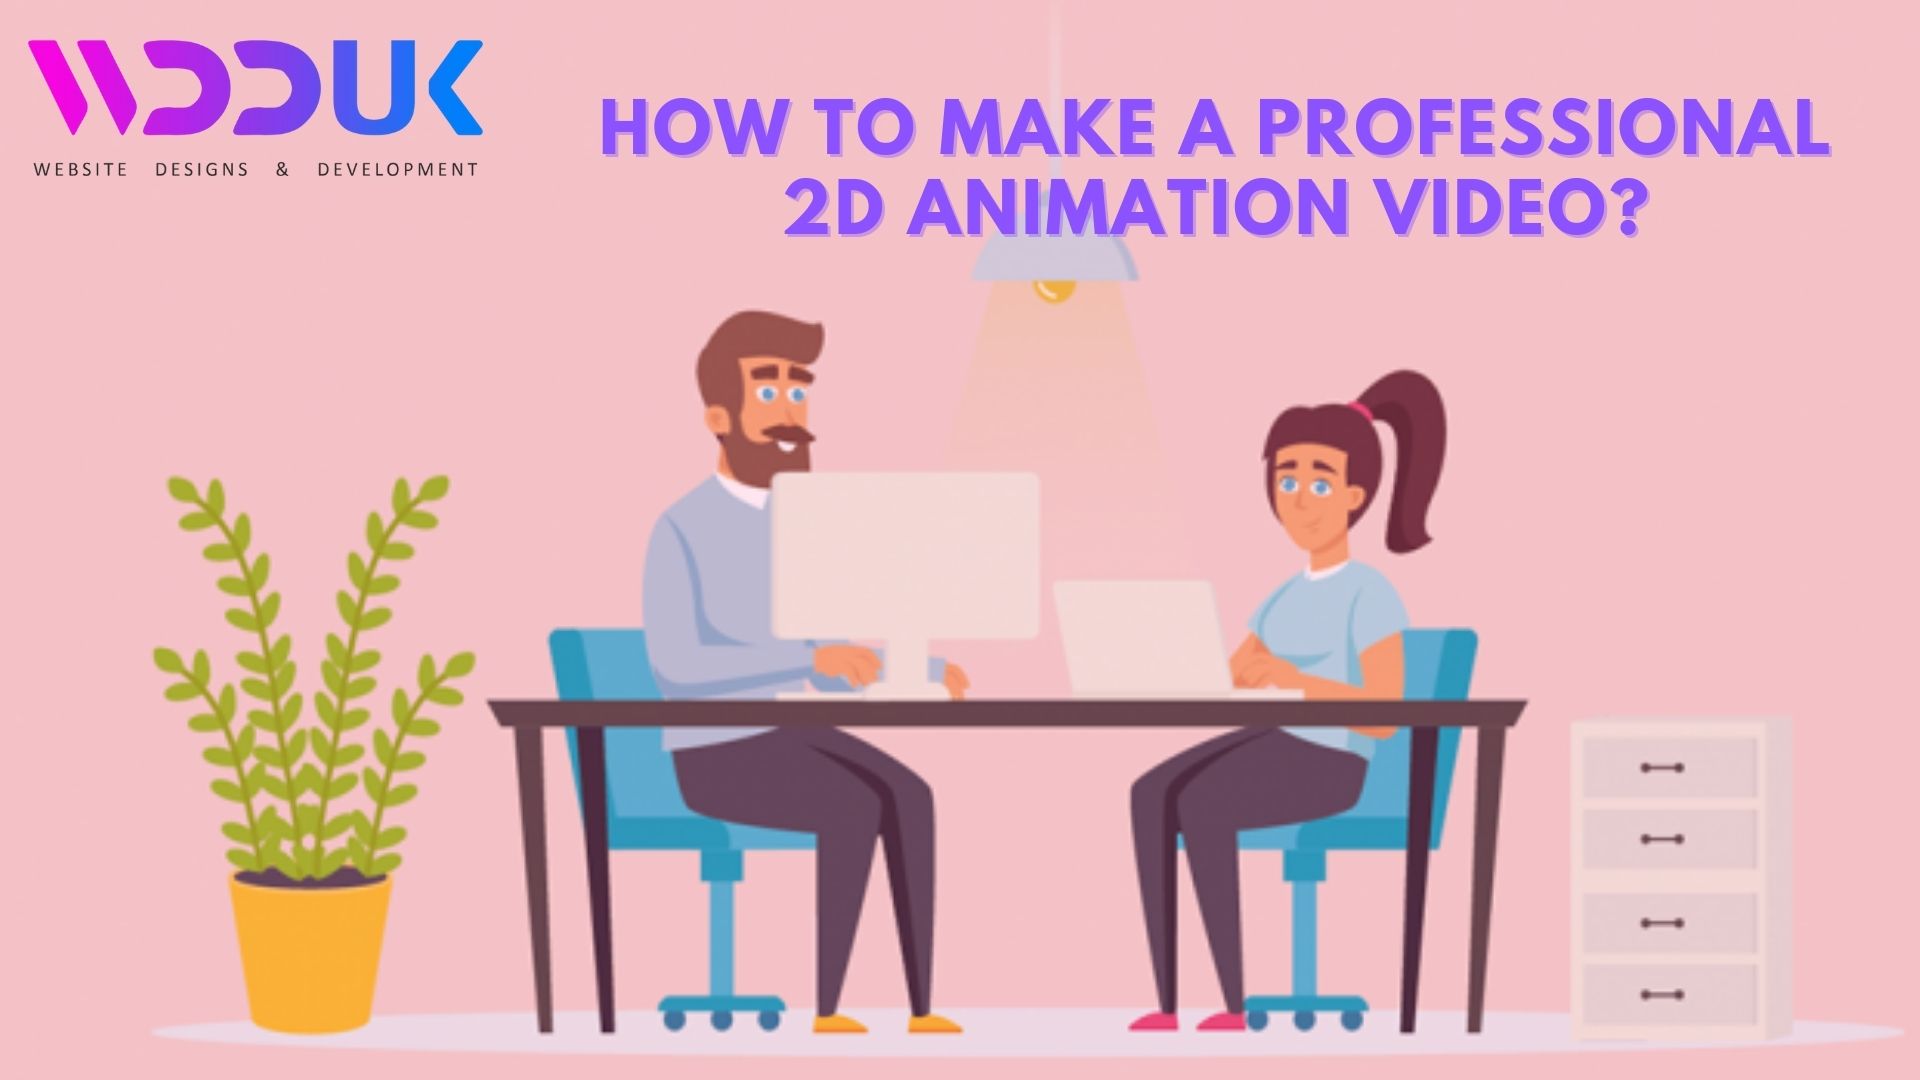 WOW HOW TO MAKE A PROFESSIONAL
2D ANIMATION VIDEO?

iE ER